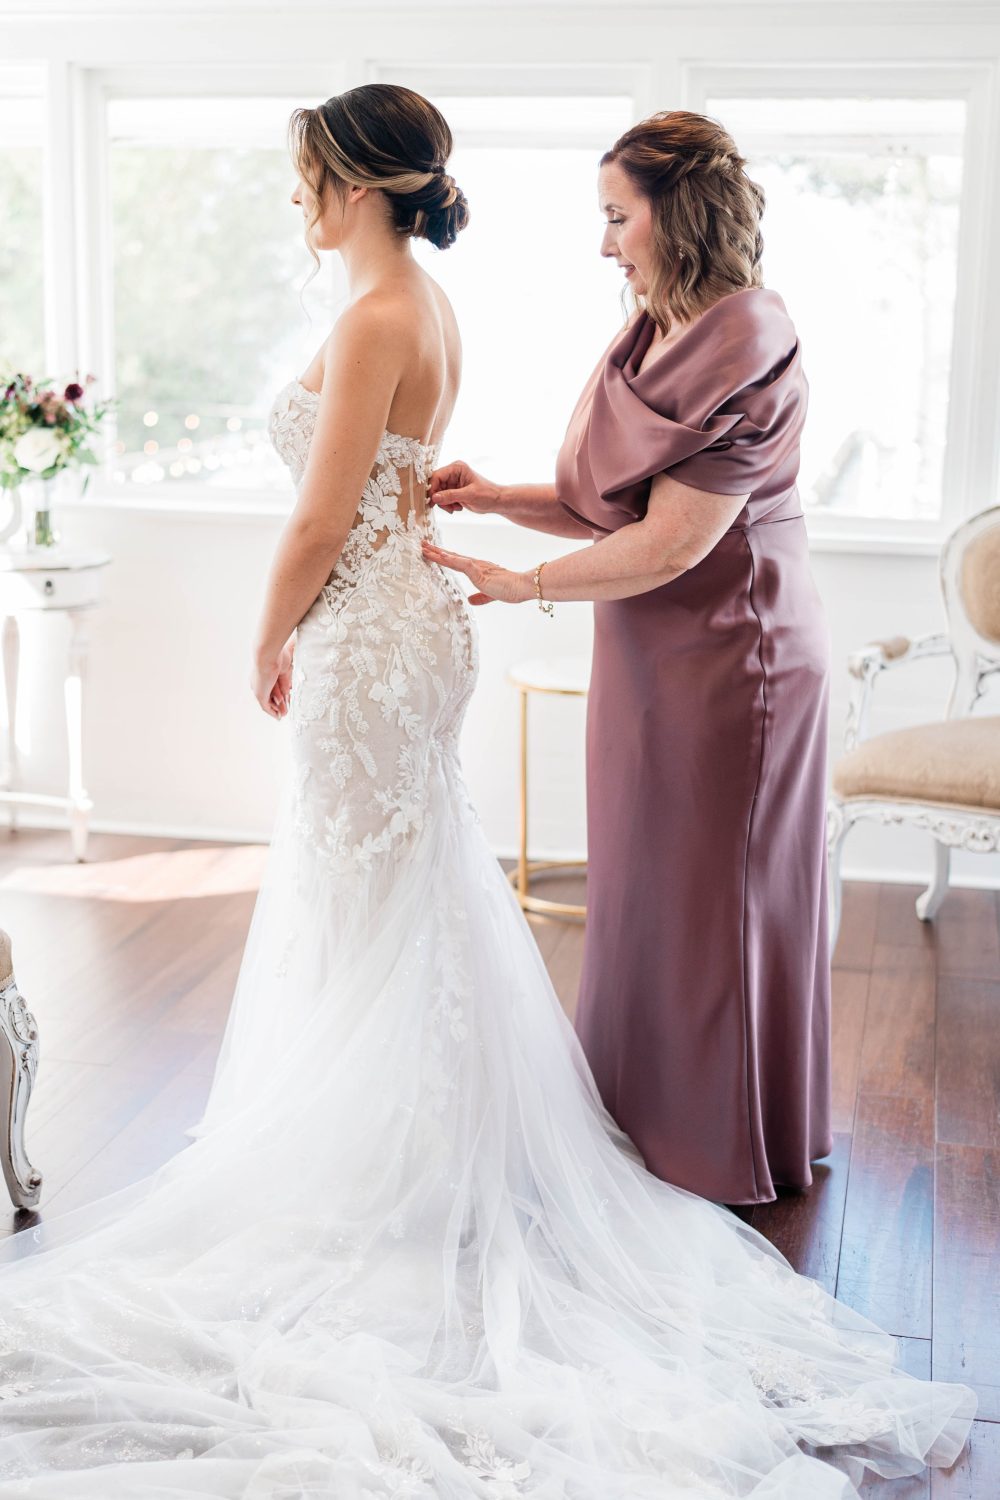 A mother and bride getting ready for the wedding